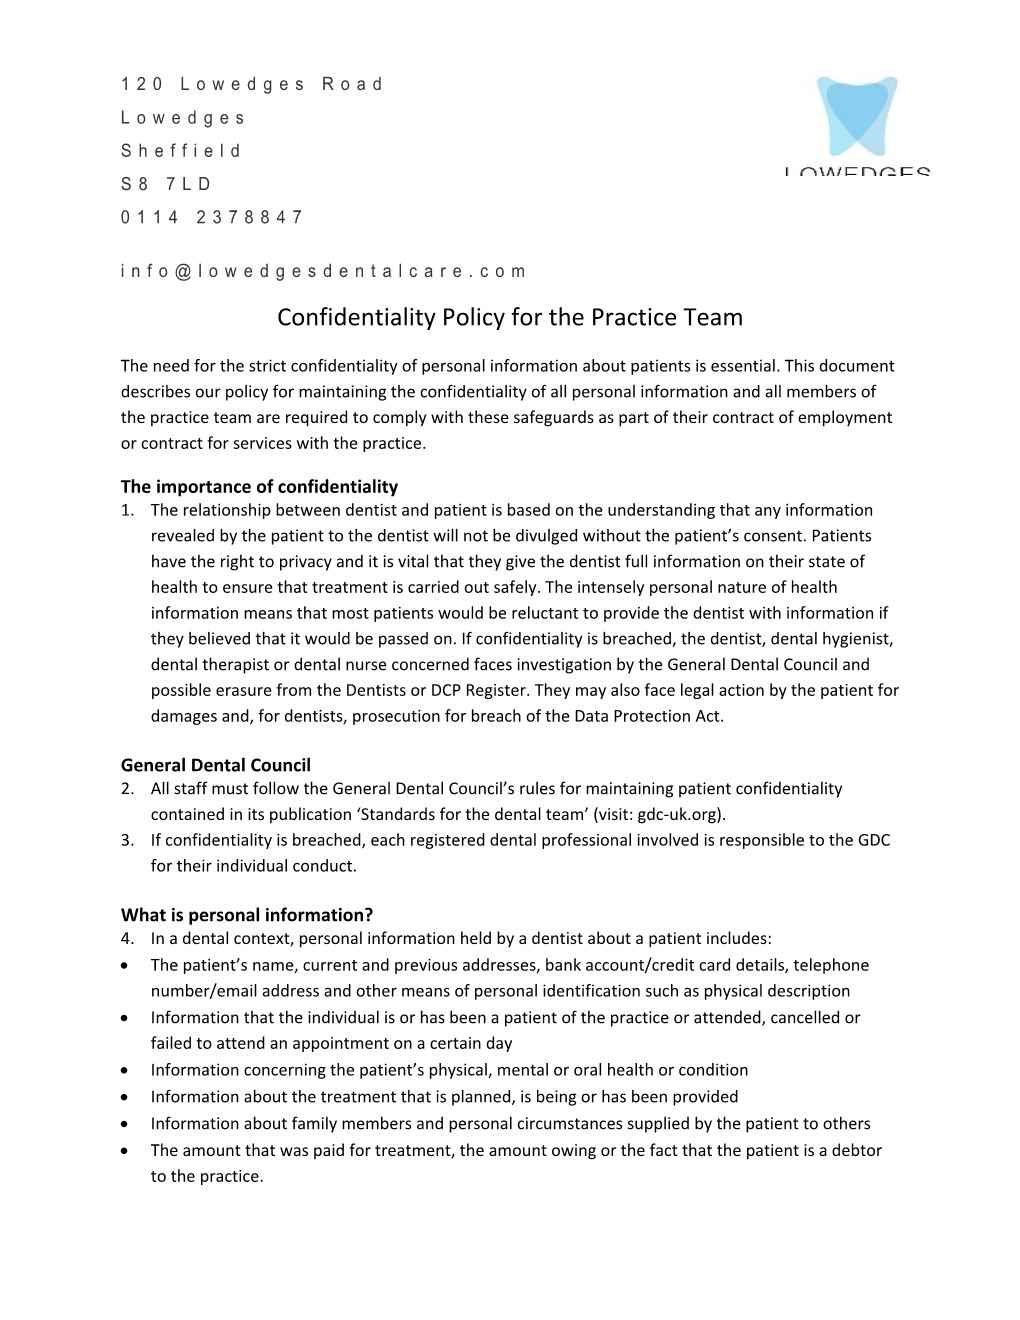 Confidentiality Policy for the Practice Team